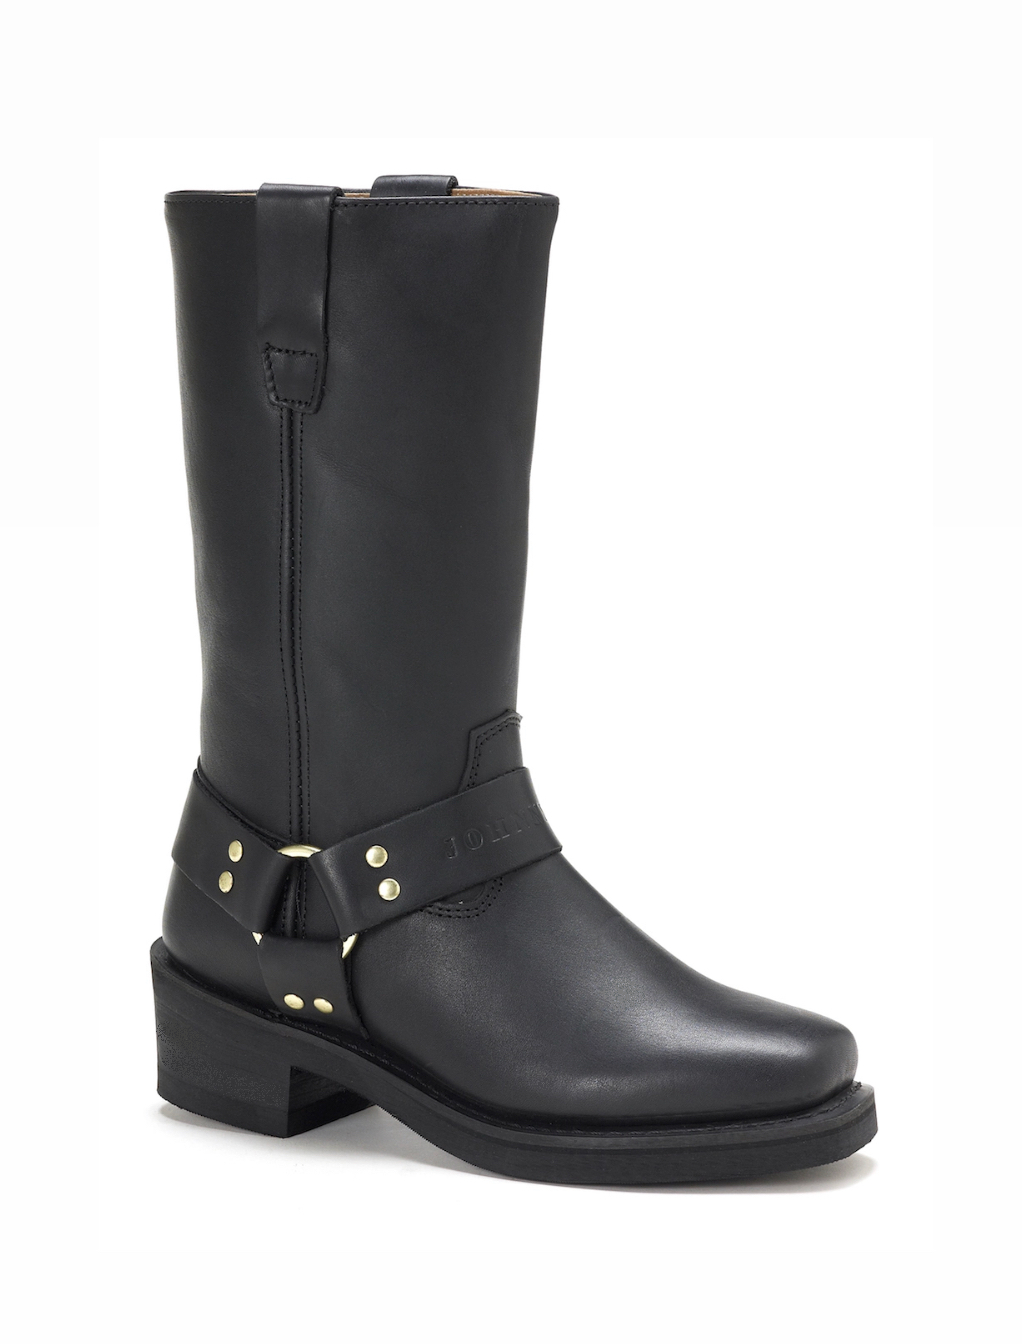 Johnny Reb Black Classic Long Side Zip Boot